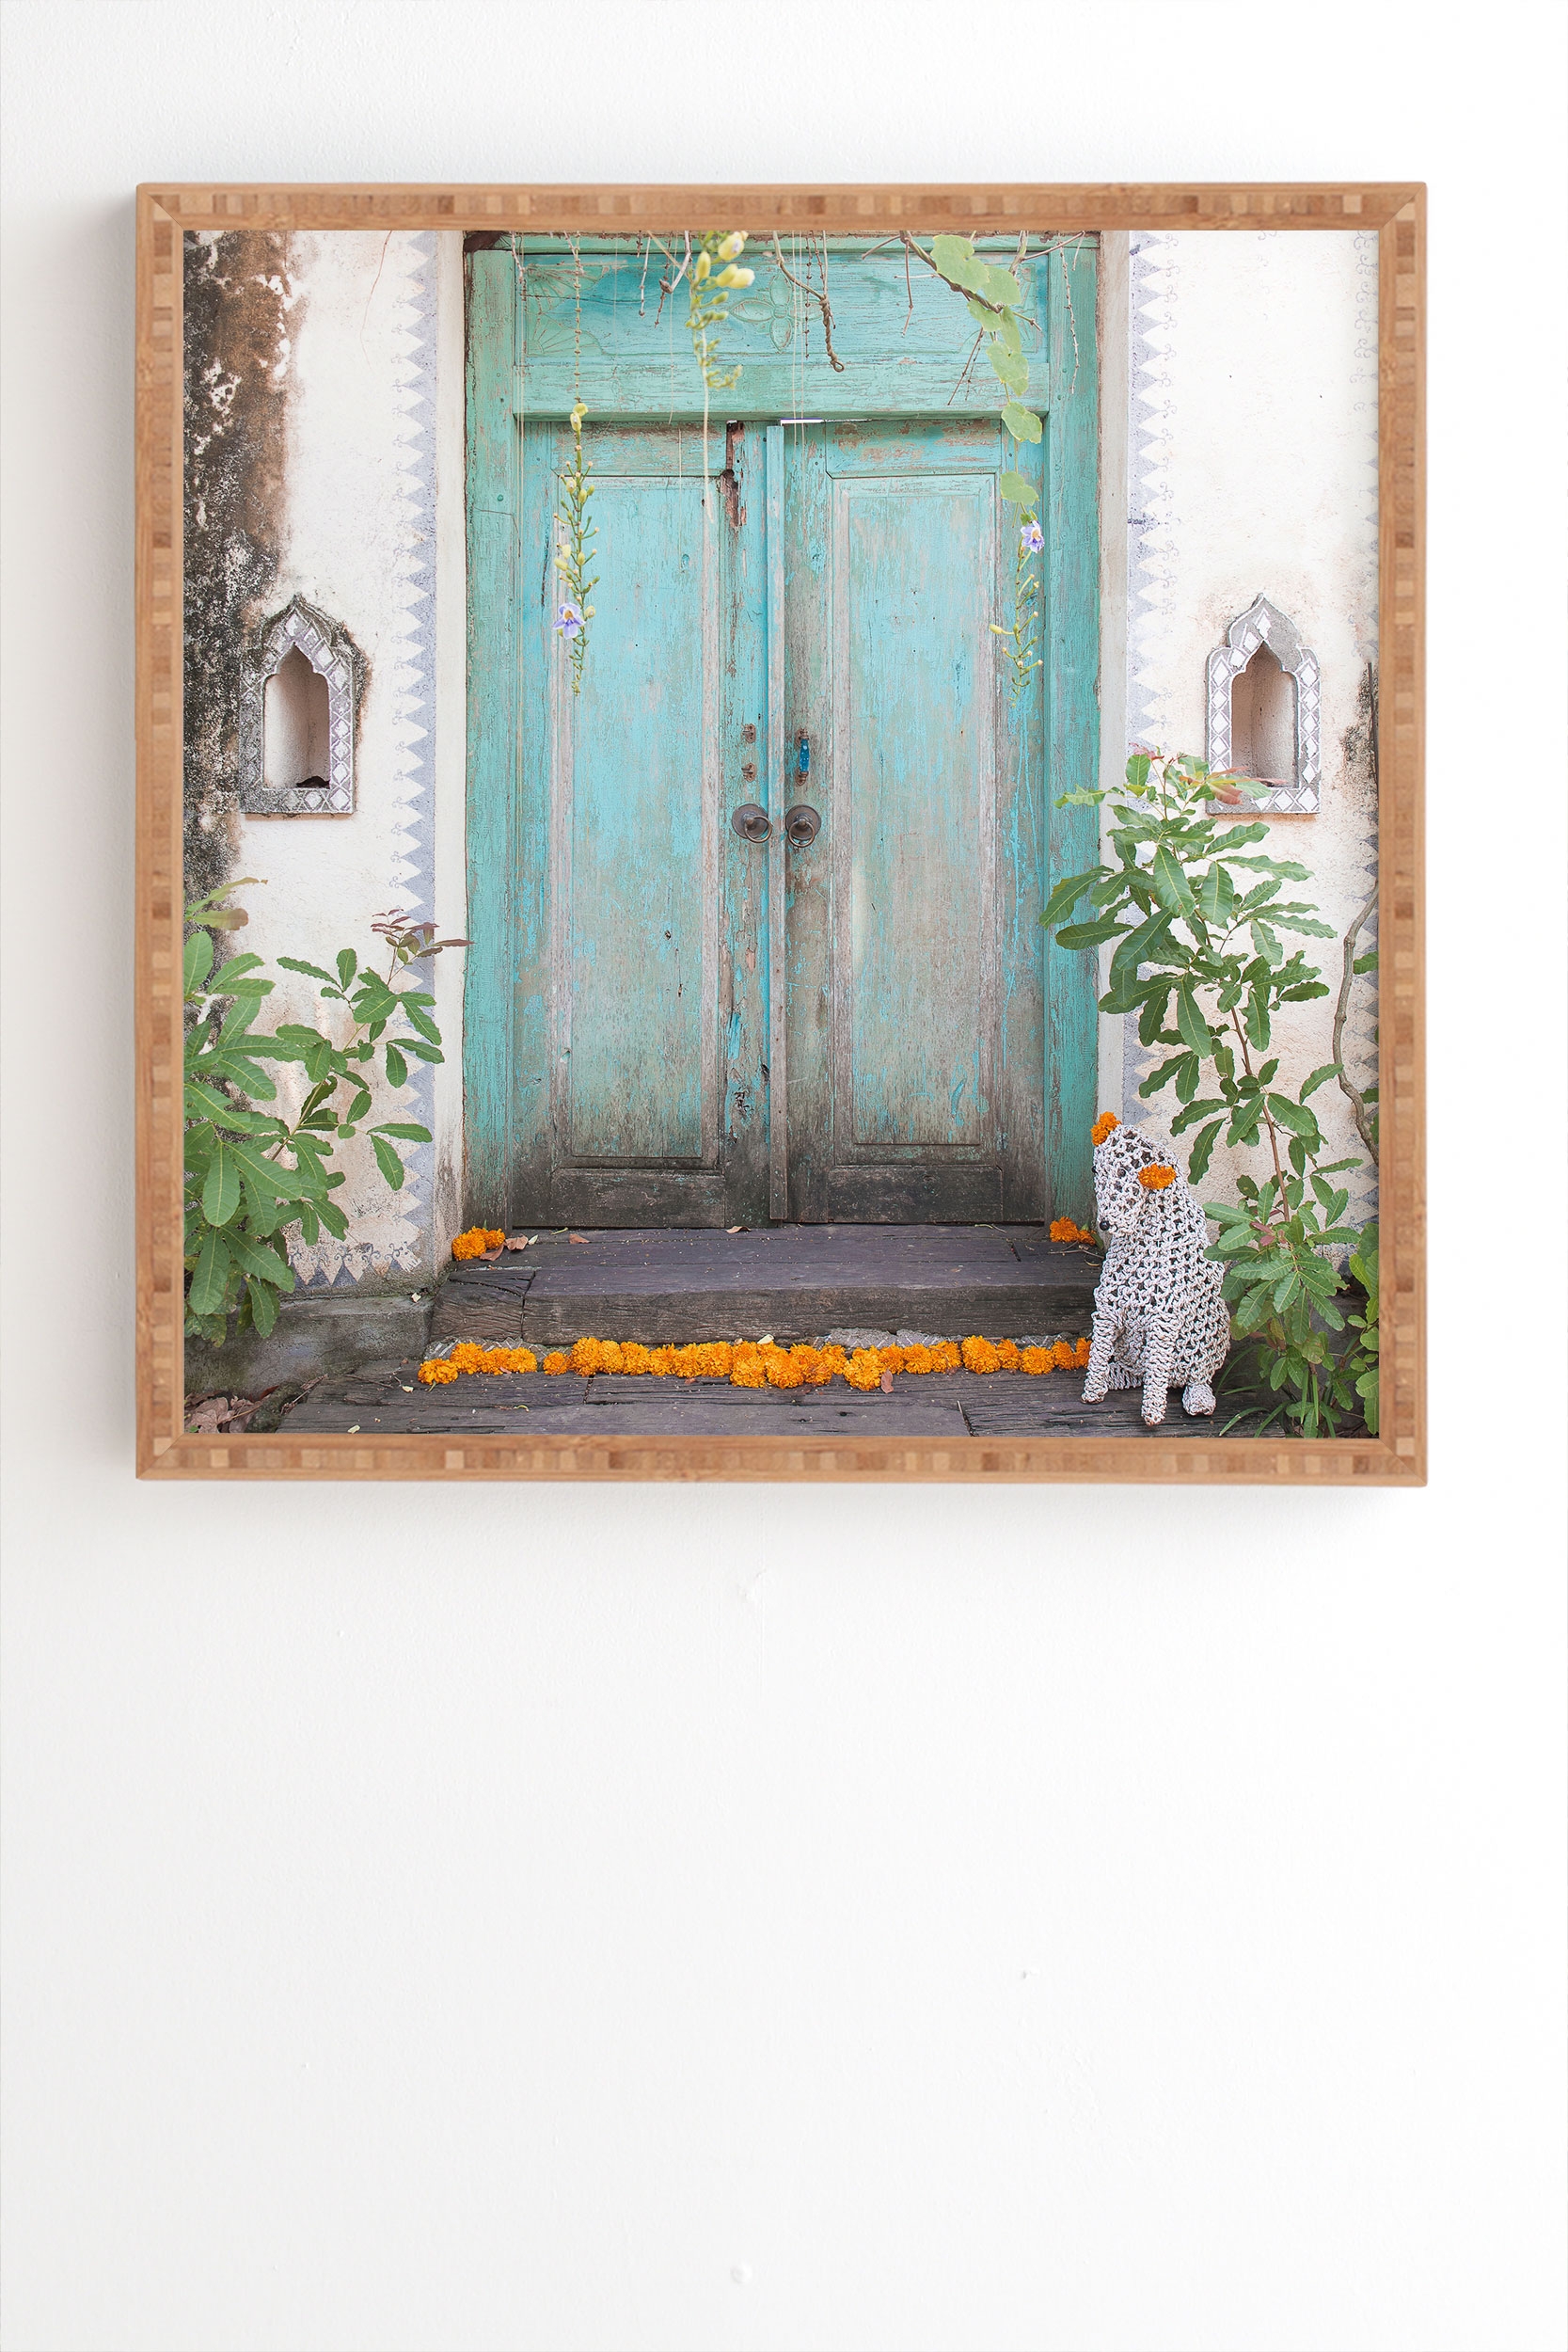 Turquoise Door by TRVLR Designs - Framed Wall Art Bamboo 19" x 22.4" - Image 1